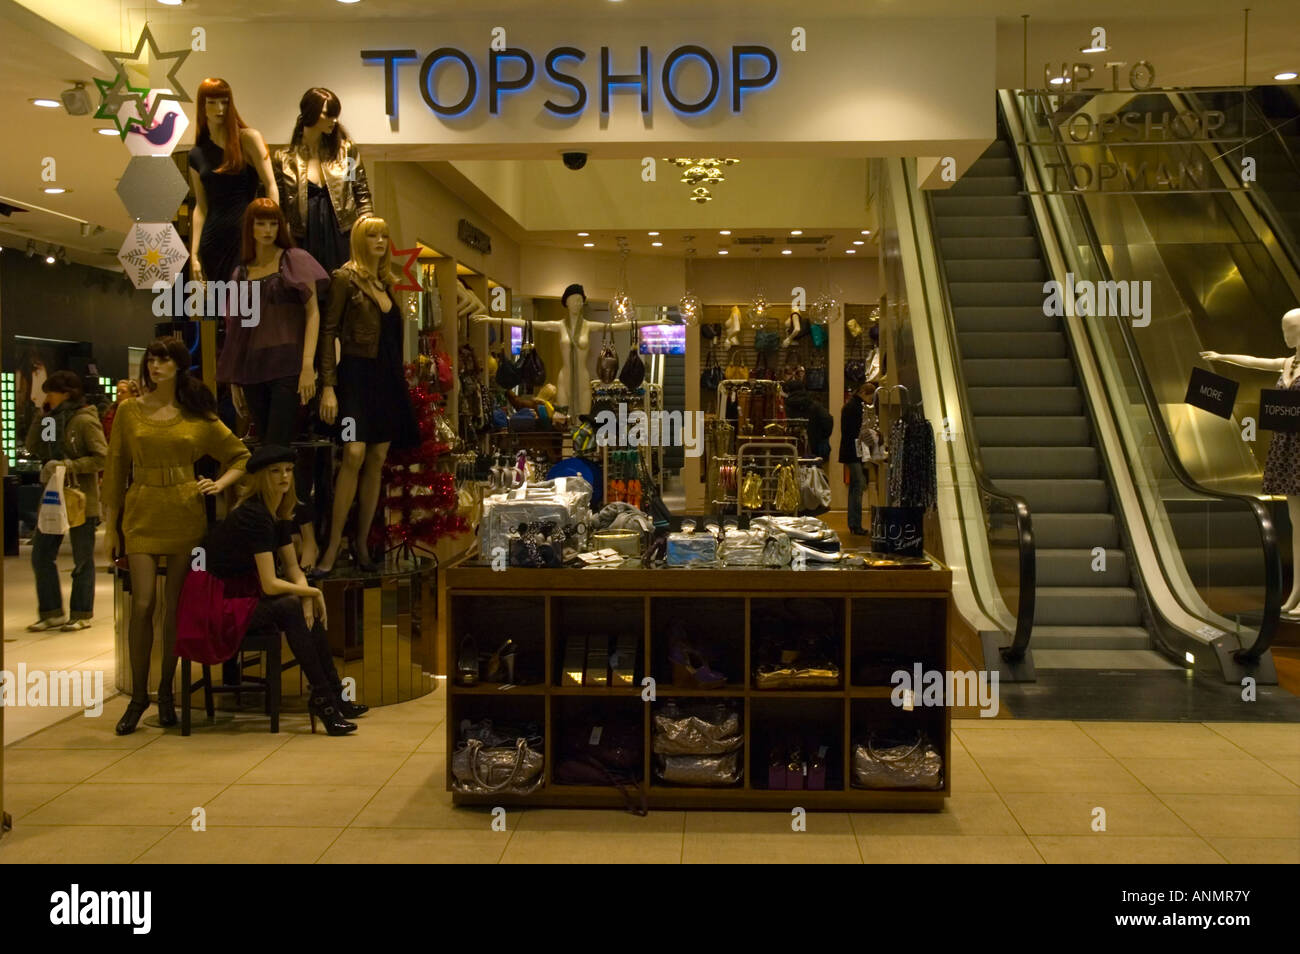 Topshop clothing store in Stockholm Sweden EU Stock Photo - Alamy